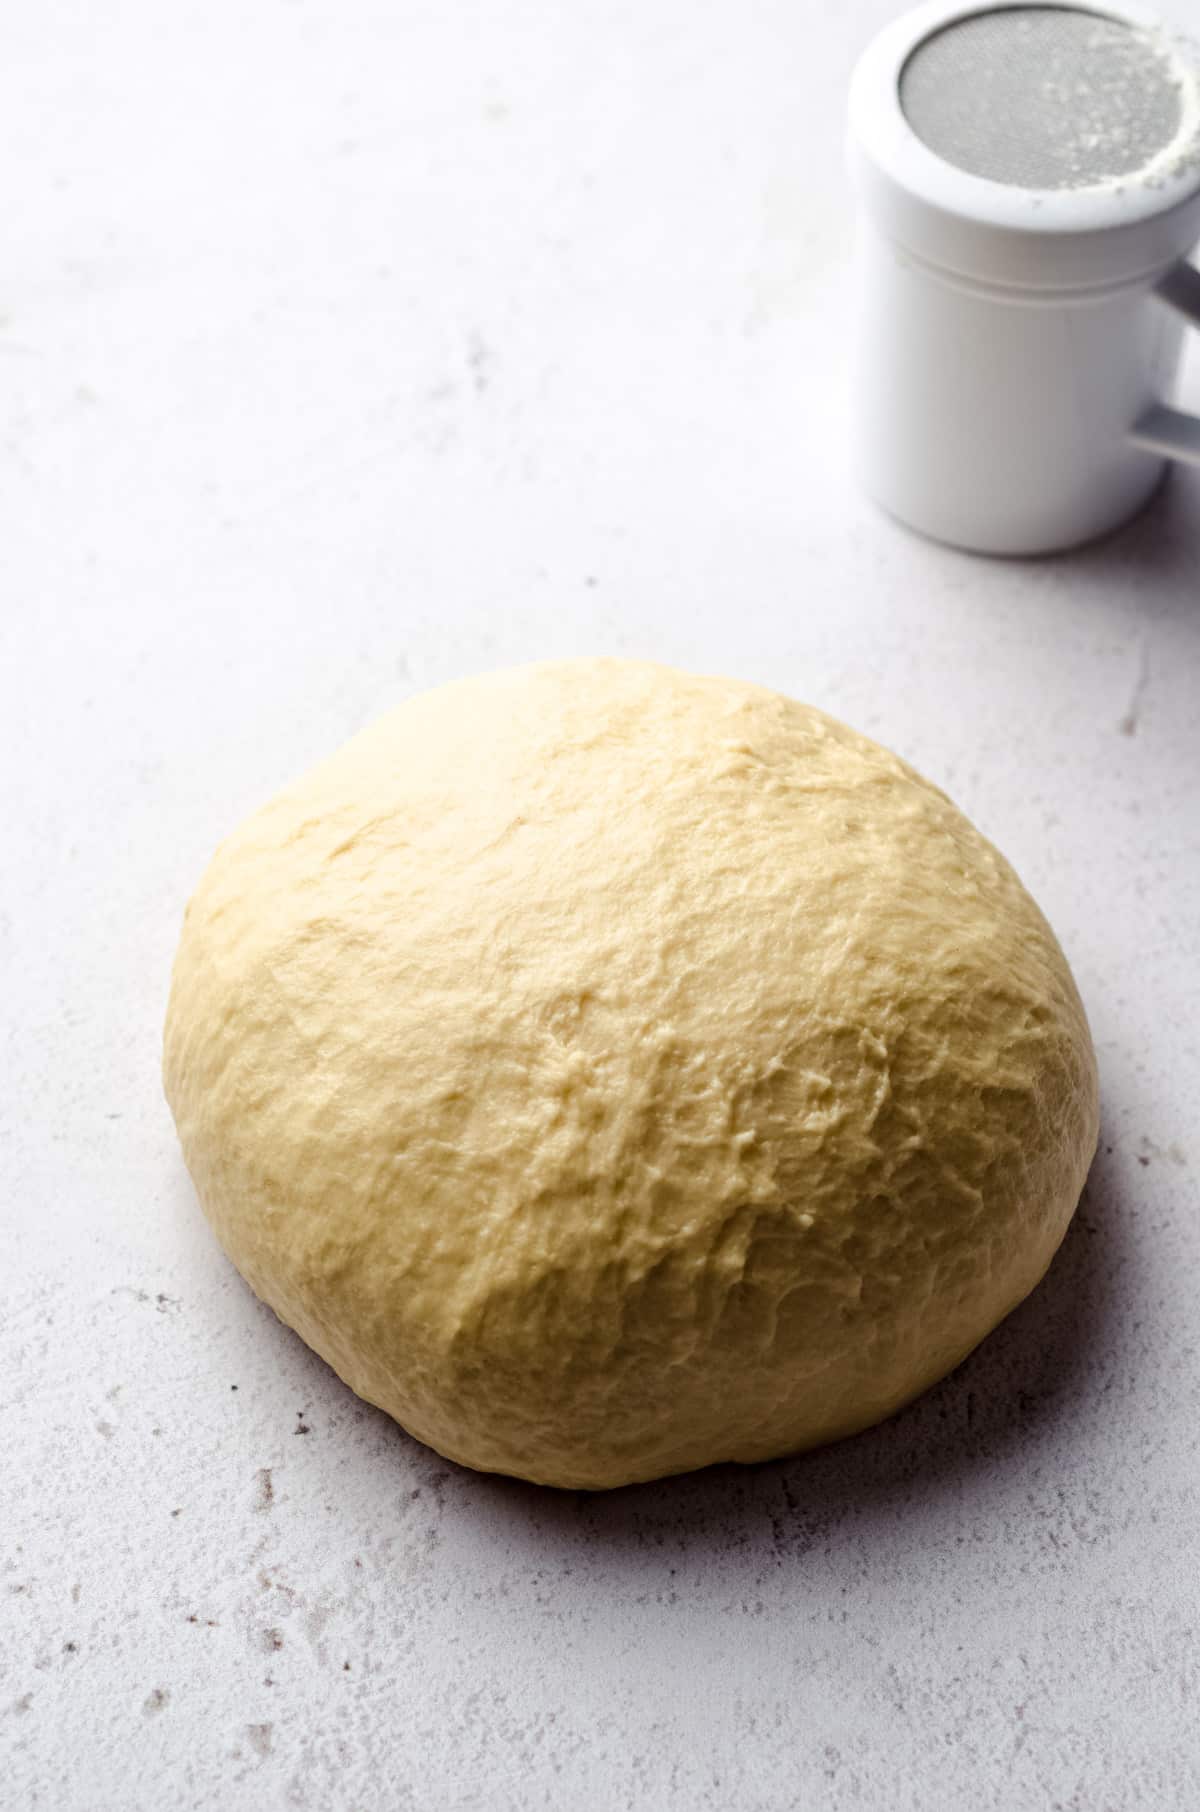 Kneaded enriched yeast dough on a white surface with a flour dredge in the background.